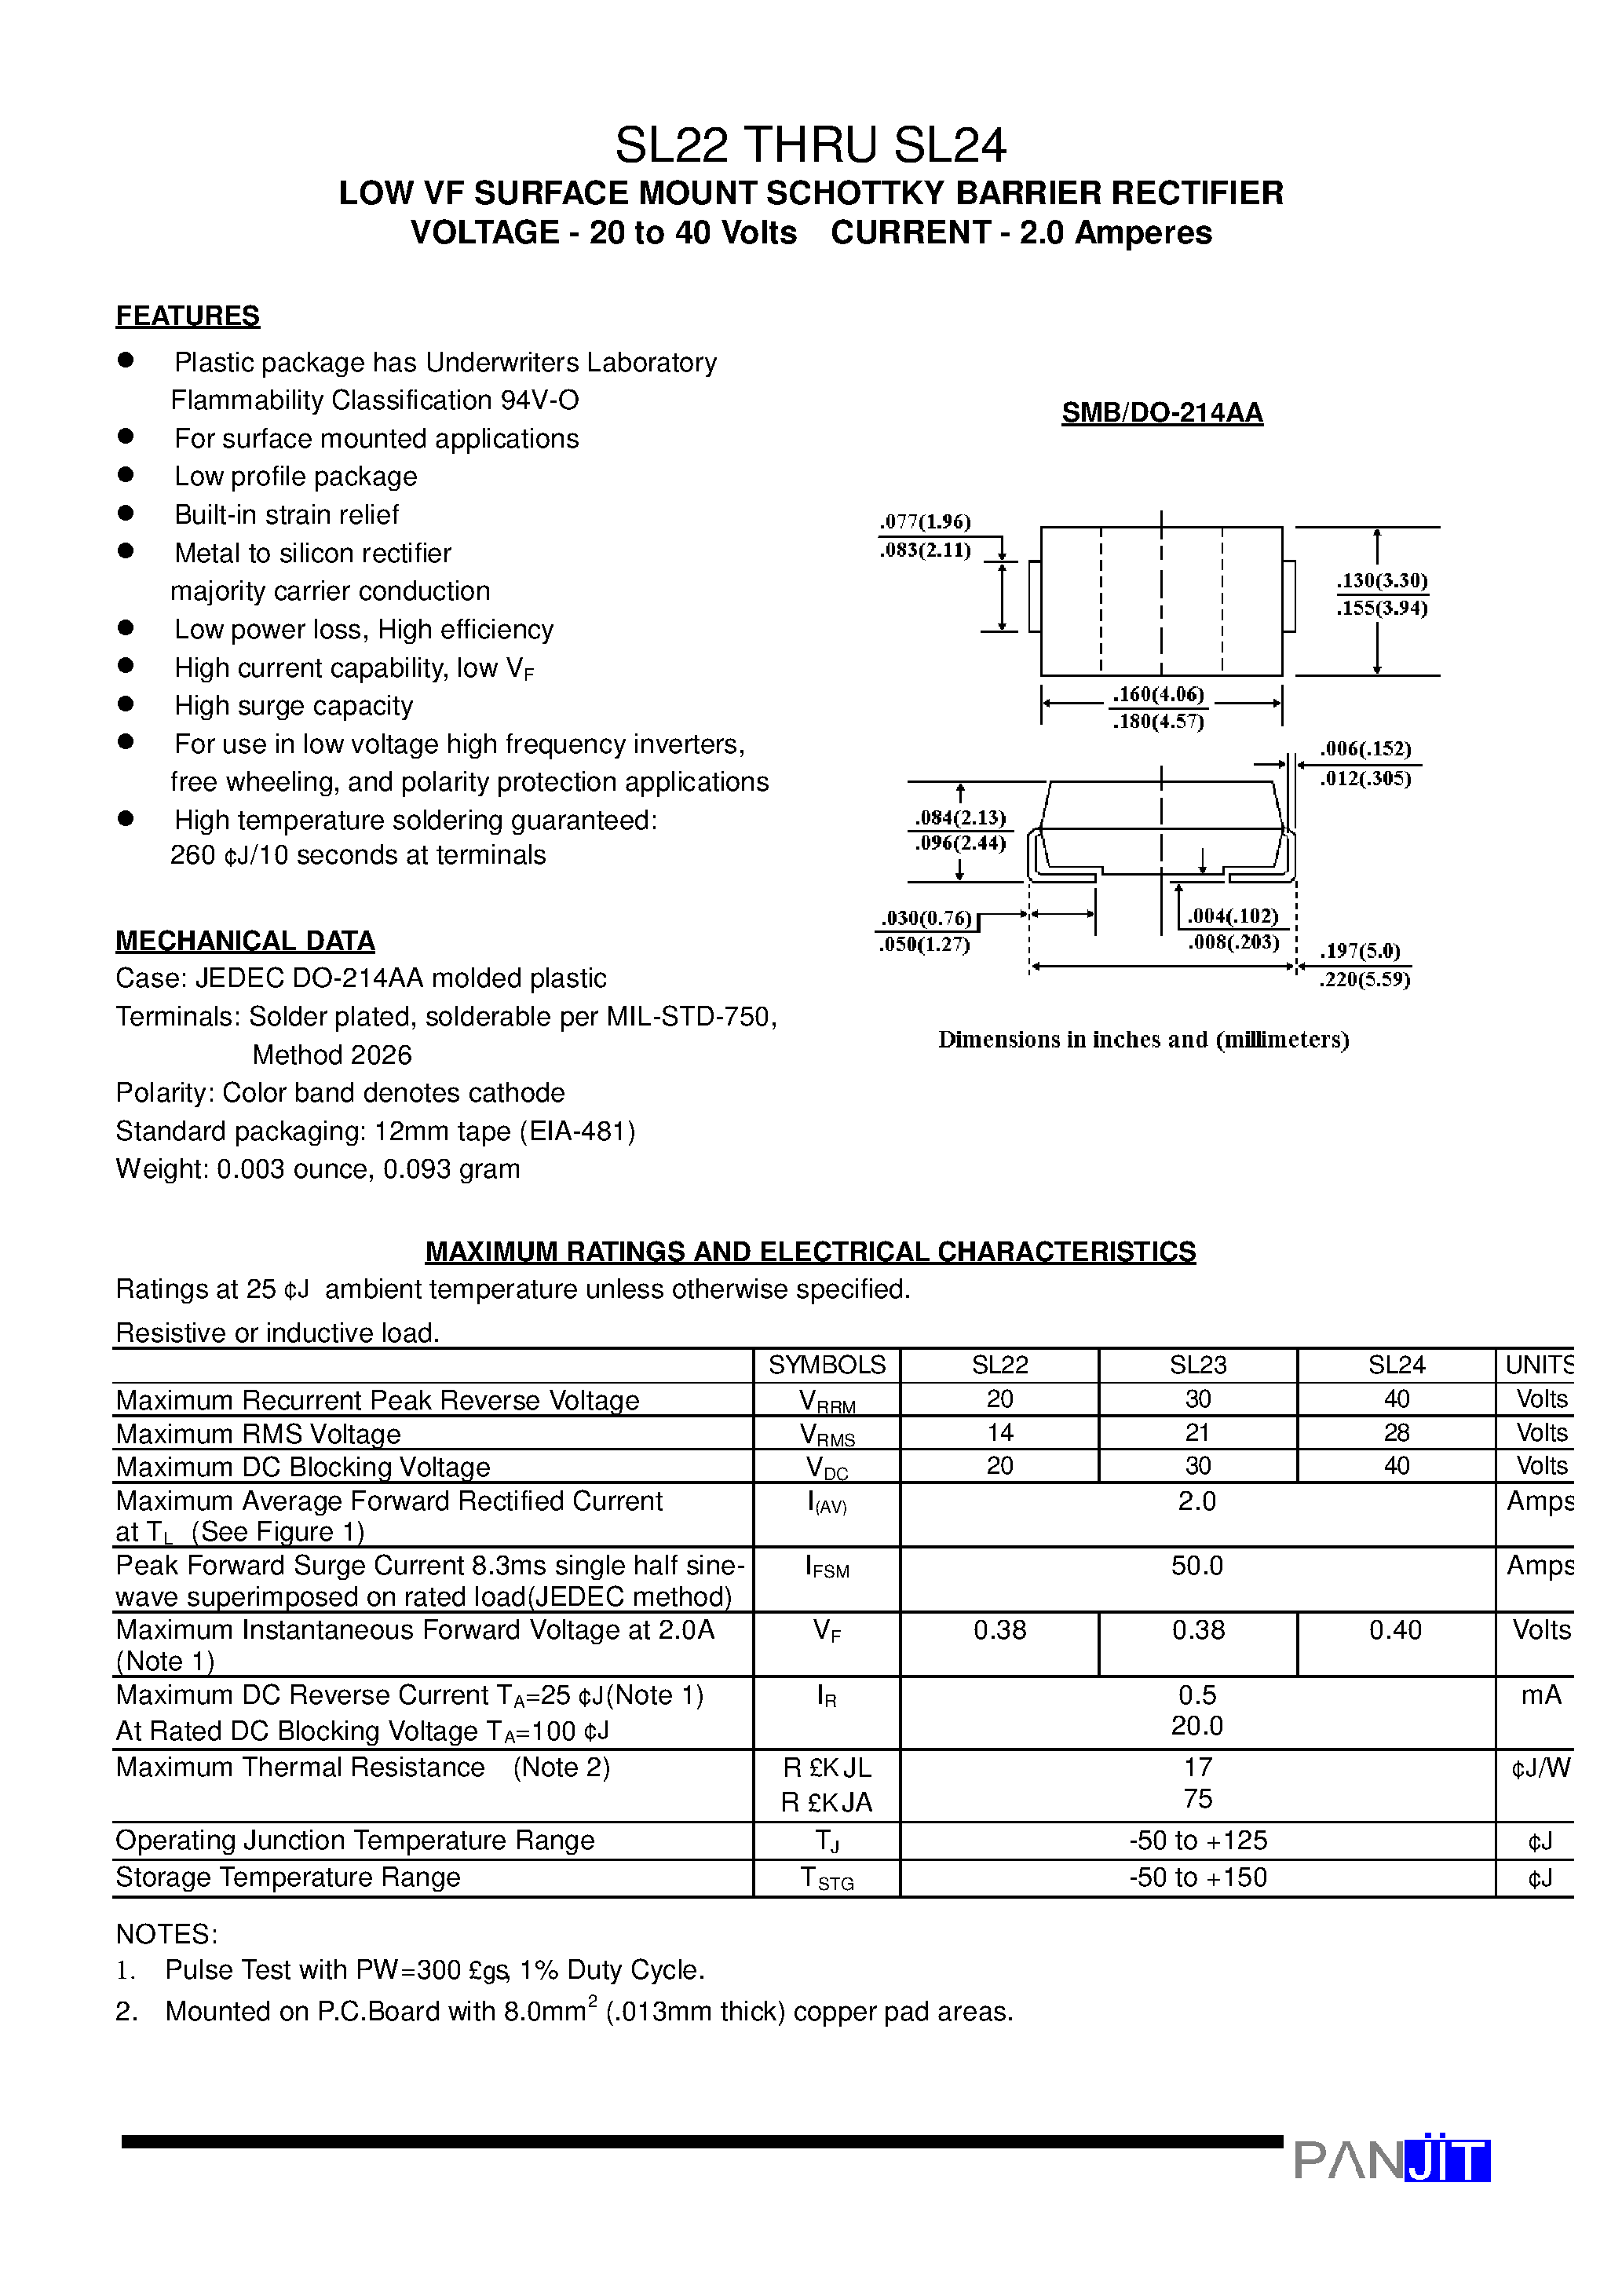 Datasheet SL22 - LOW VF SURFACE MOUNT SCHOTTKY BARRIER RECTIFIER(VOLTAGE - 20 to 40 Volts CURRENT - 2.0 Amperes) page 1